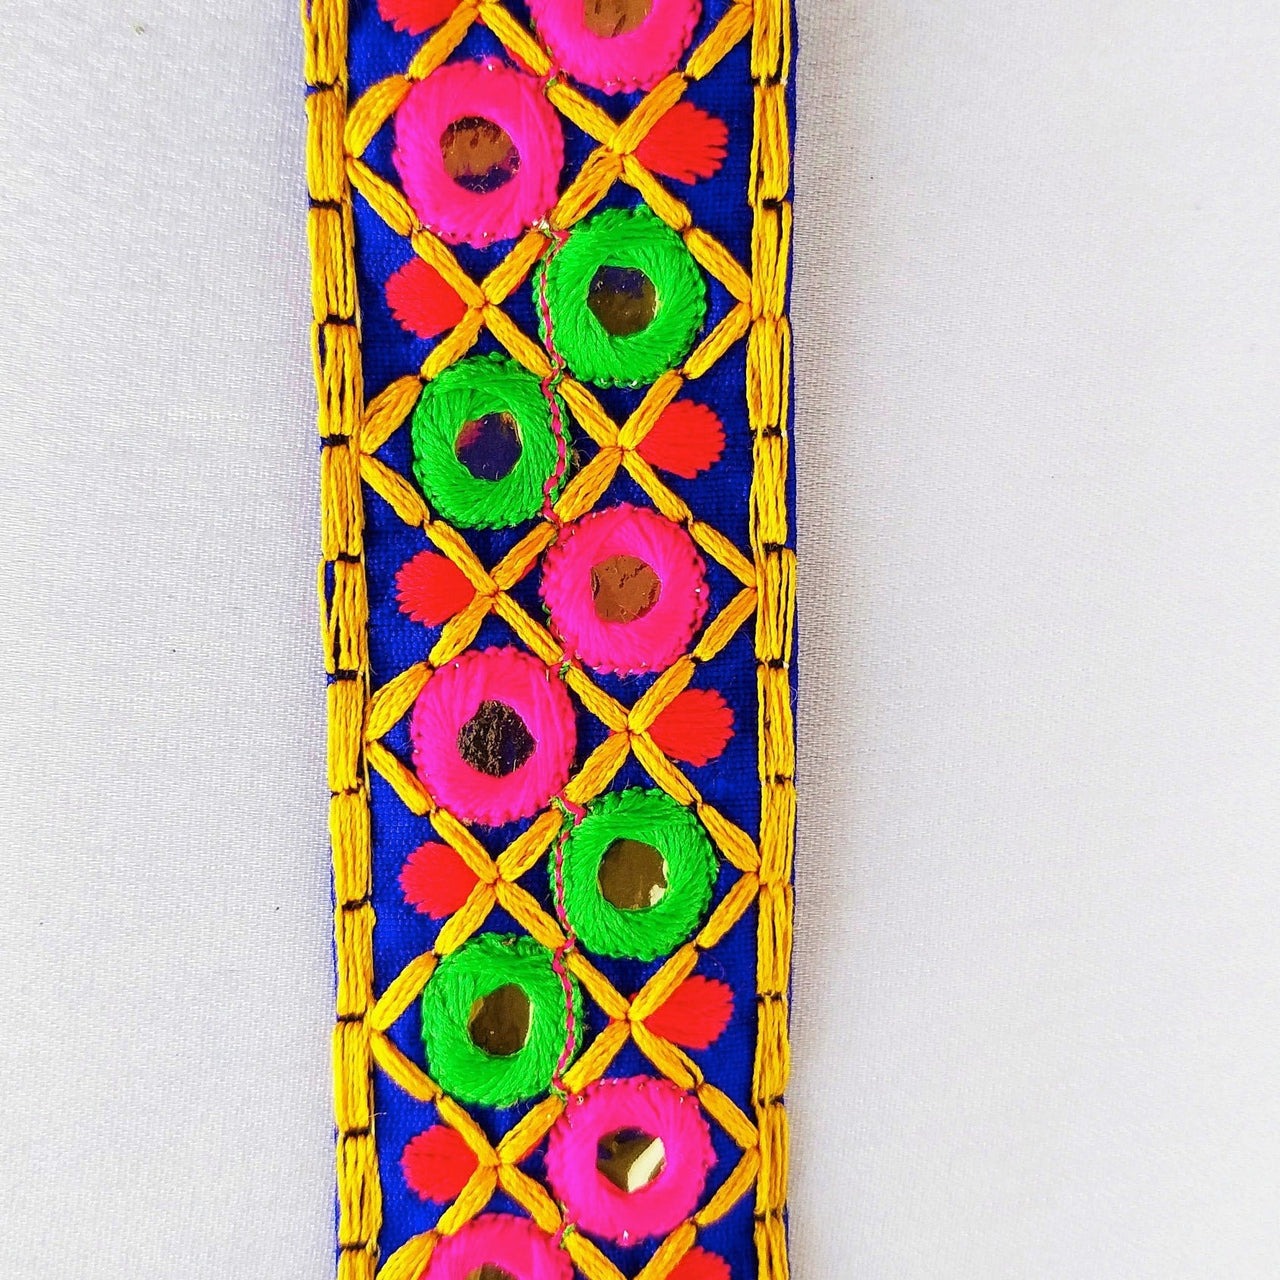 Blue Cotton Fabric Mirrored Trim With Embroidery In Fuchsia Pink, Green, Red & Yellow Threads